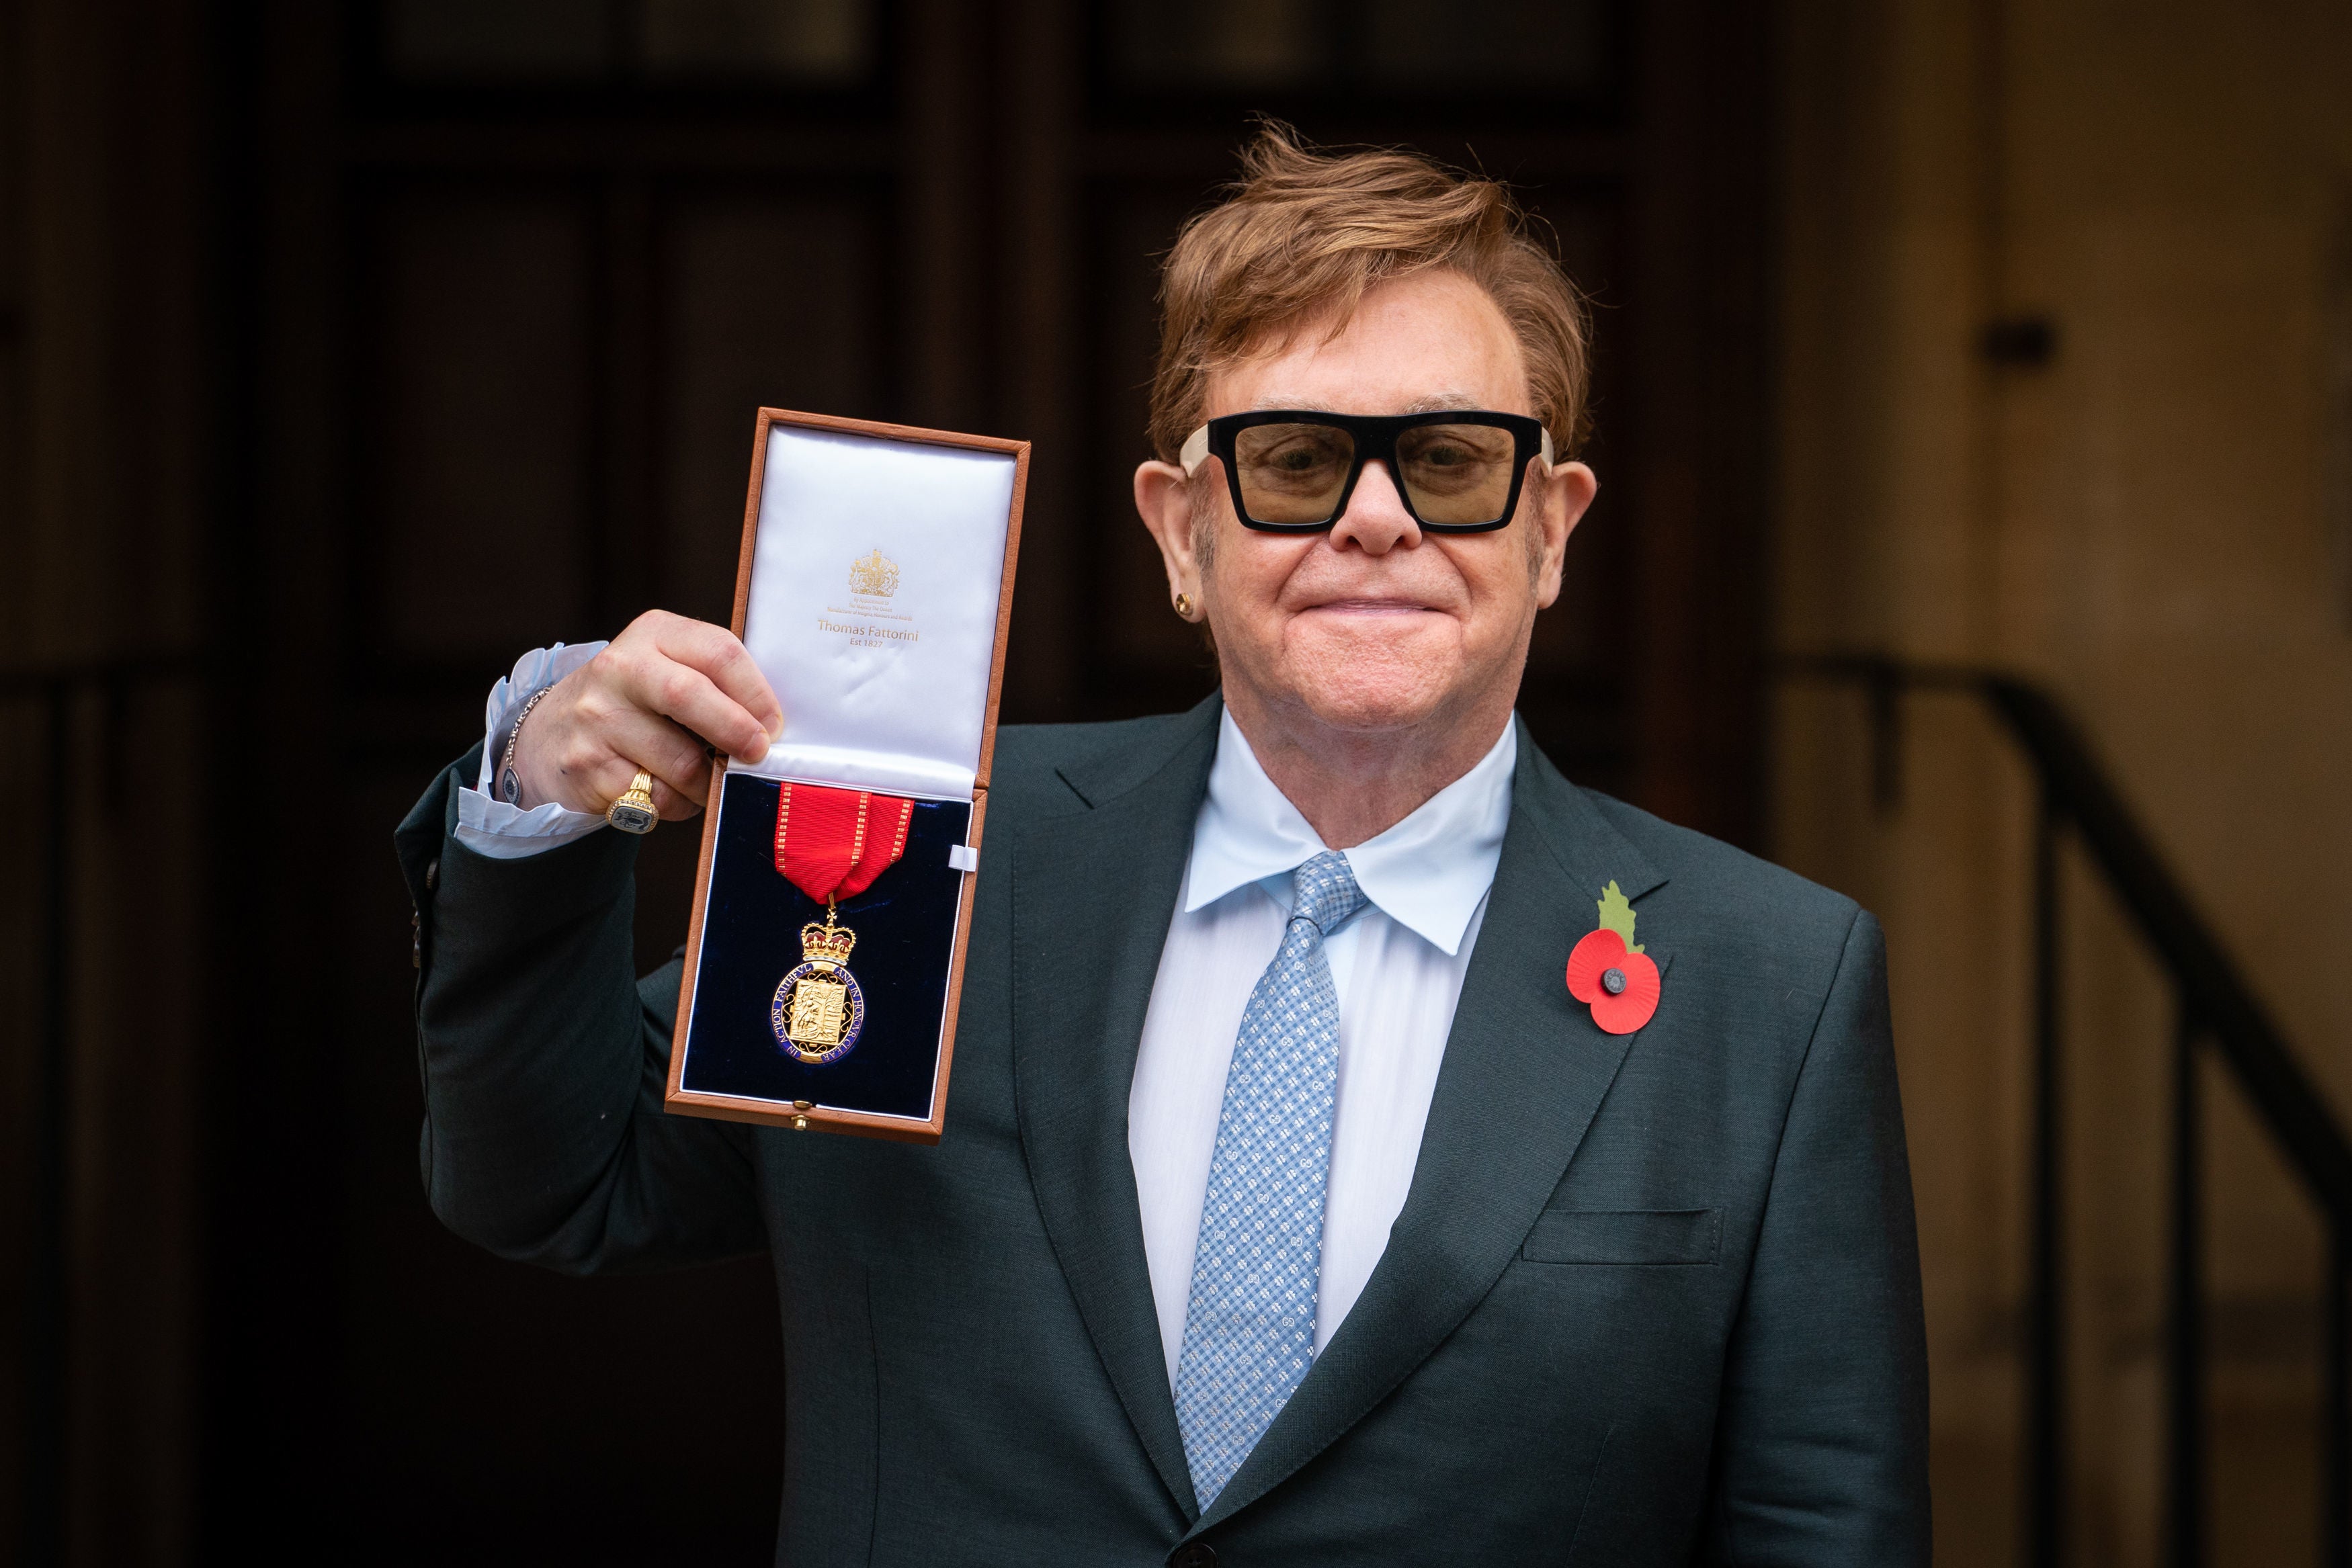 <p>At a time when Sir Elton John should have been enjoying his honour, his personal details were exposed</p>